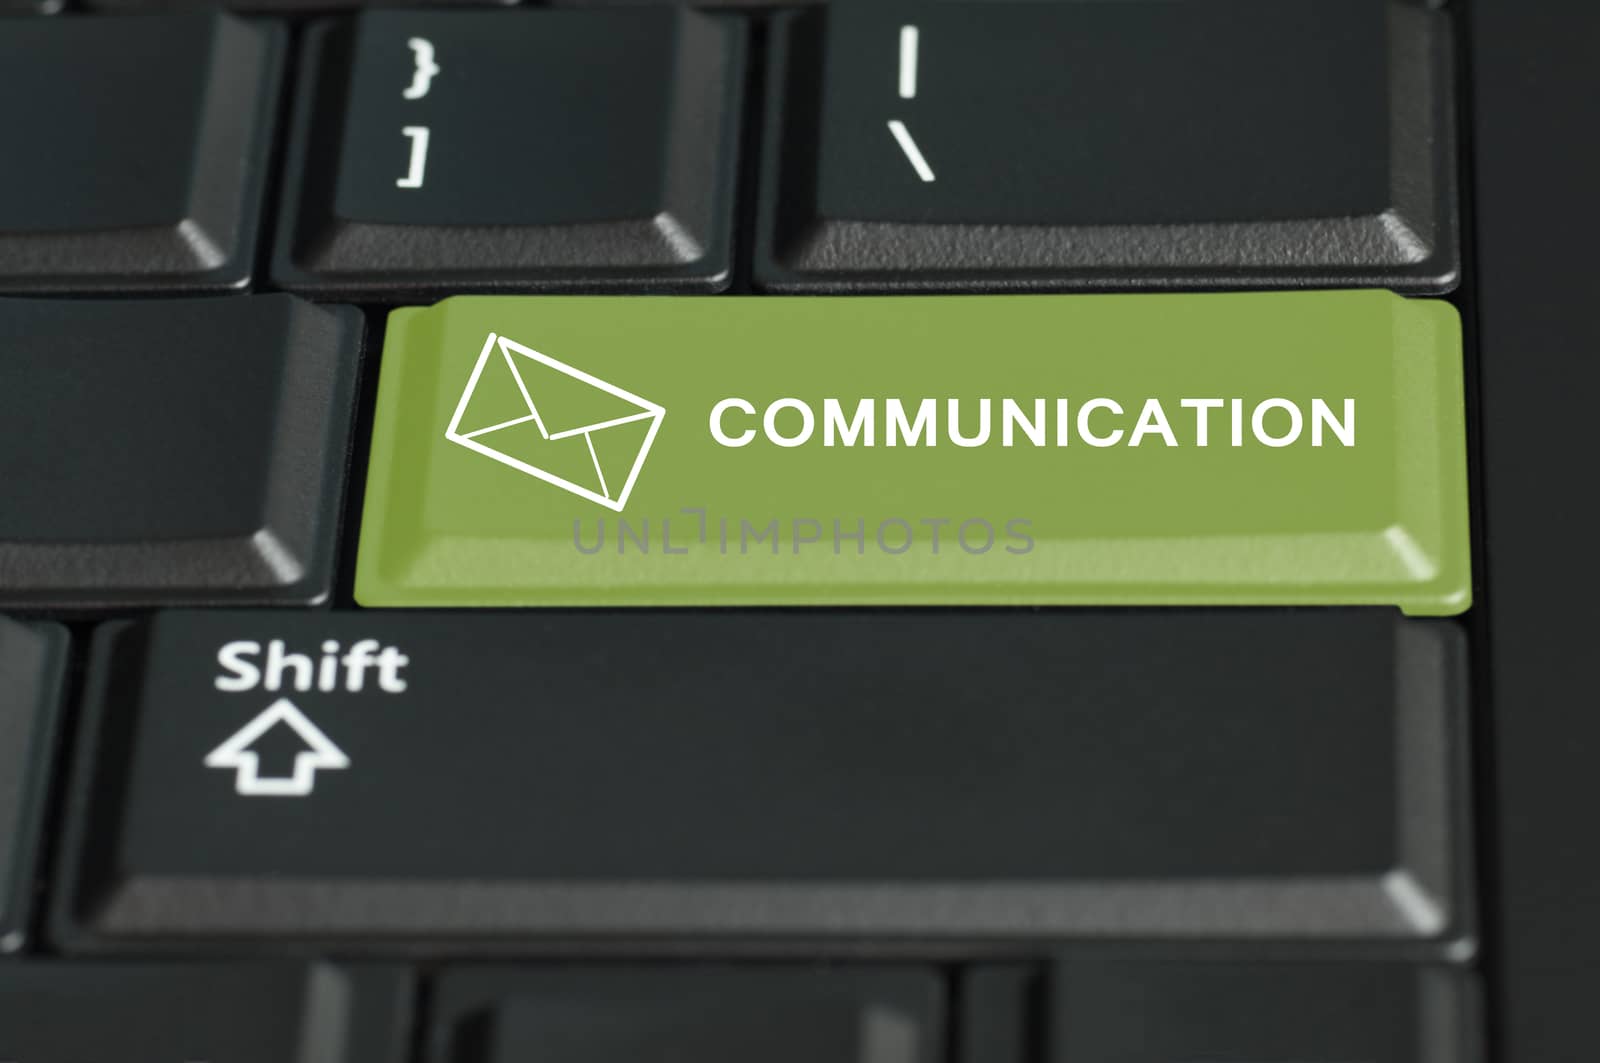 Concept of communication action via enter button. The focus is on the enter key with the shift button on the bottom